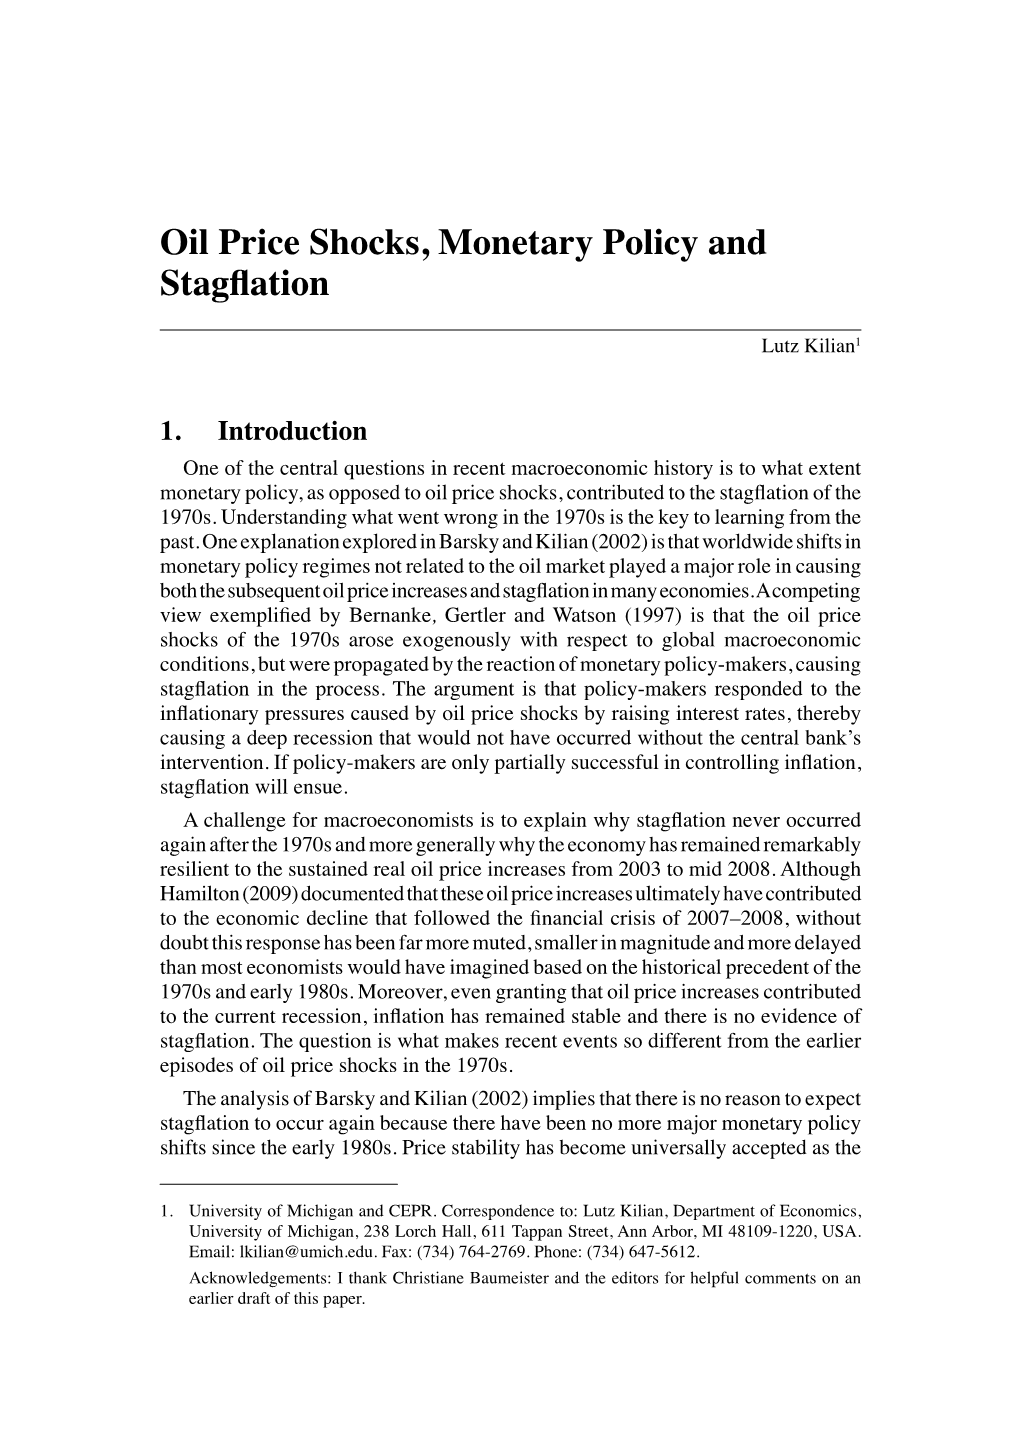 Oil Price Shocks, Monetary Policy and Stagflation